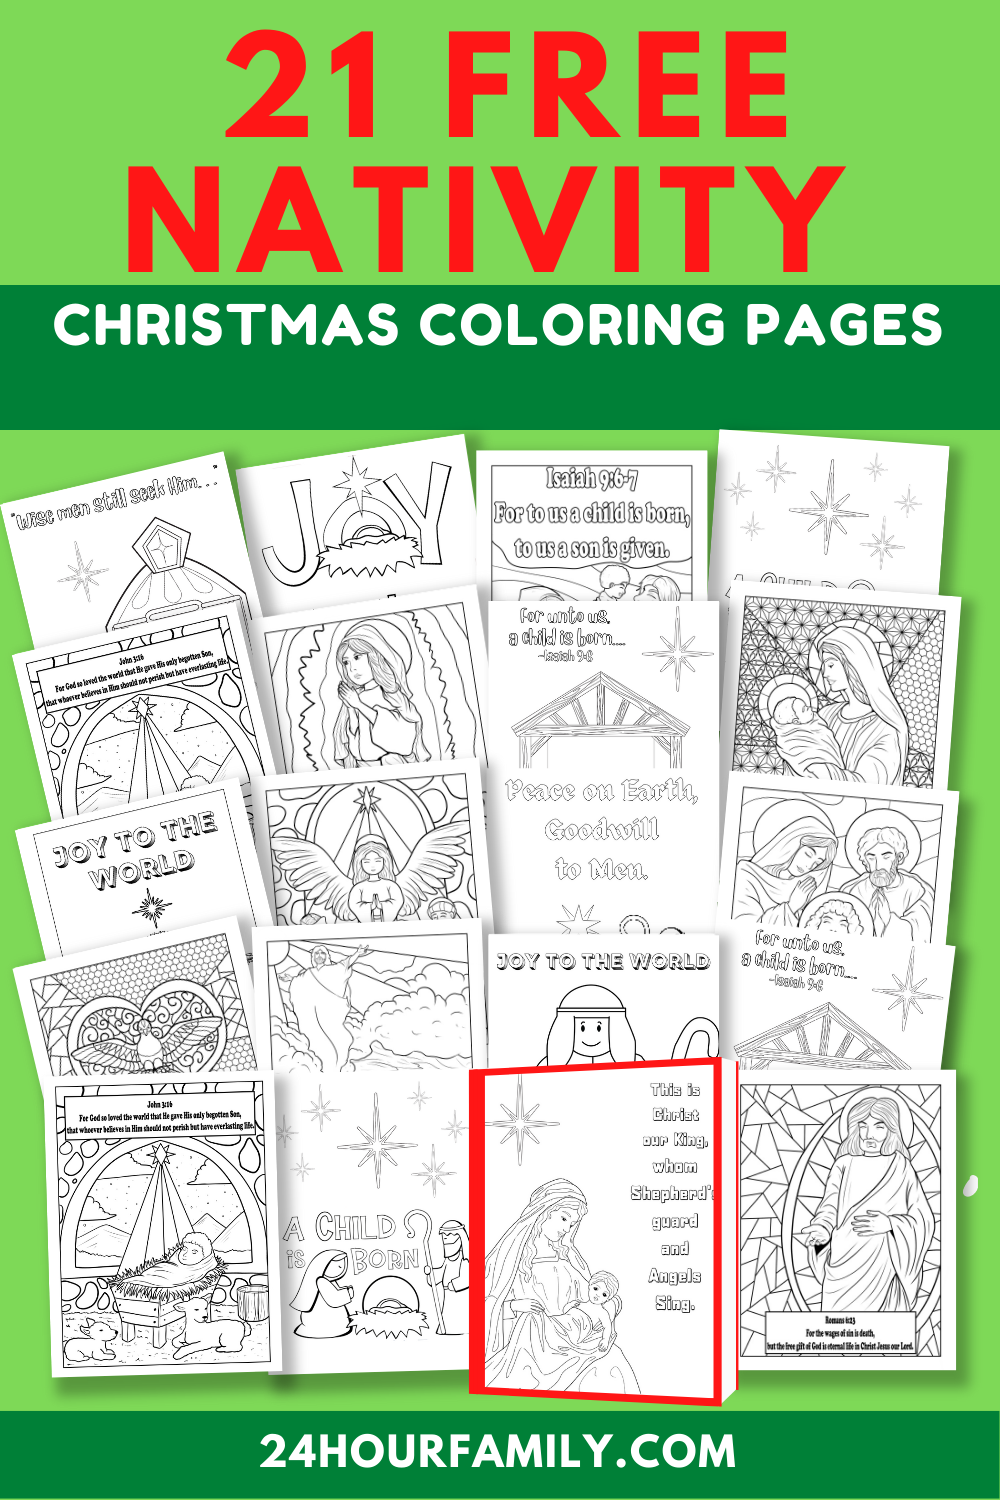 21 Nativity Coloring Page Printables (Free Download)